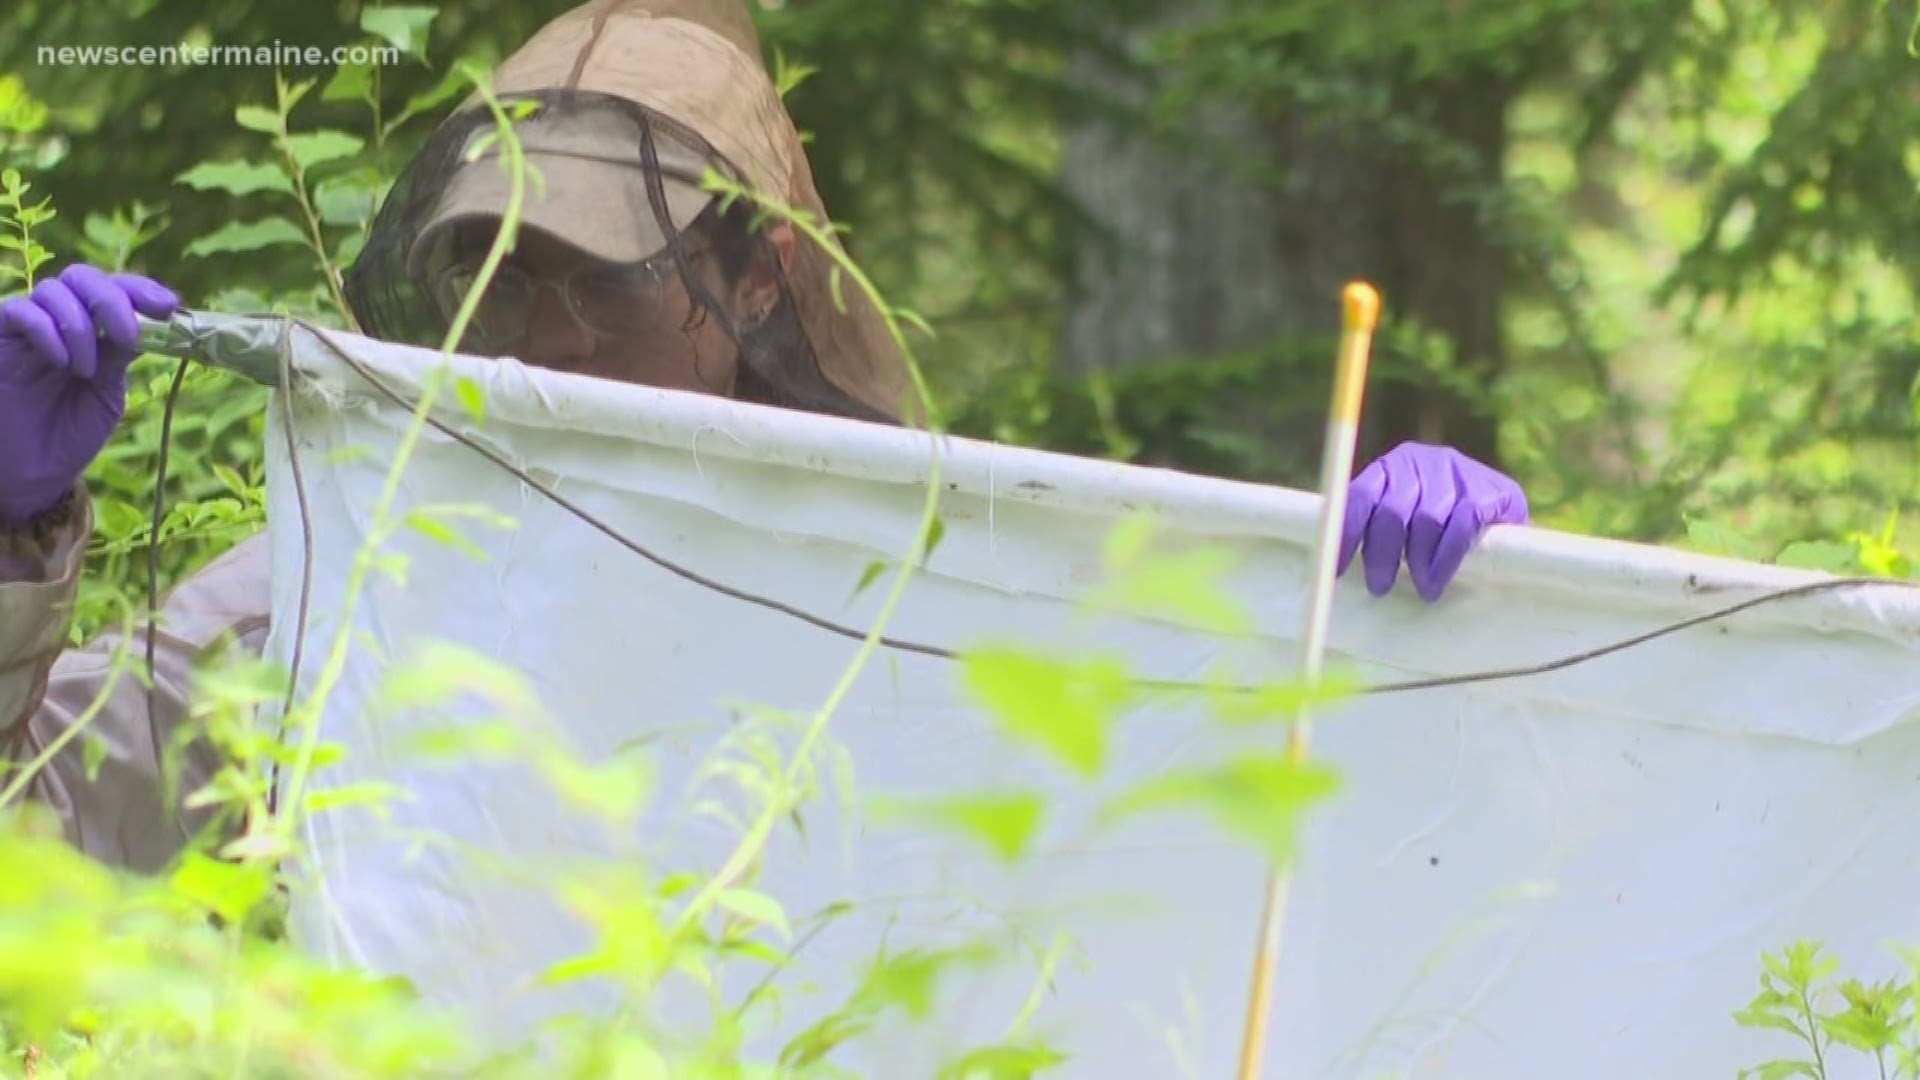 Researchers are looking through sections of Maine woods, trying to determine how and why ticks are moving farther north.